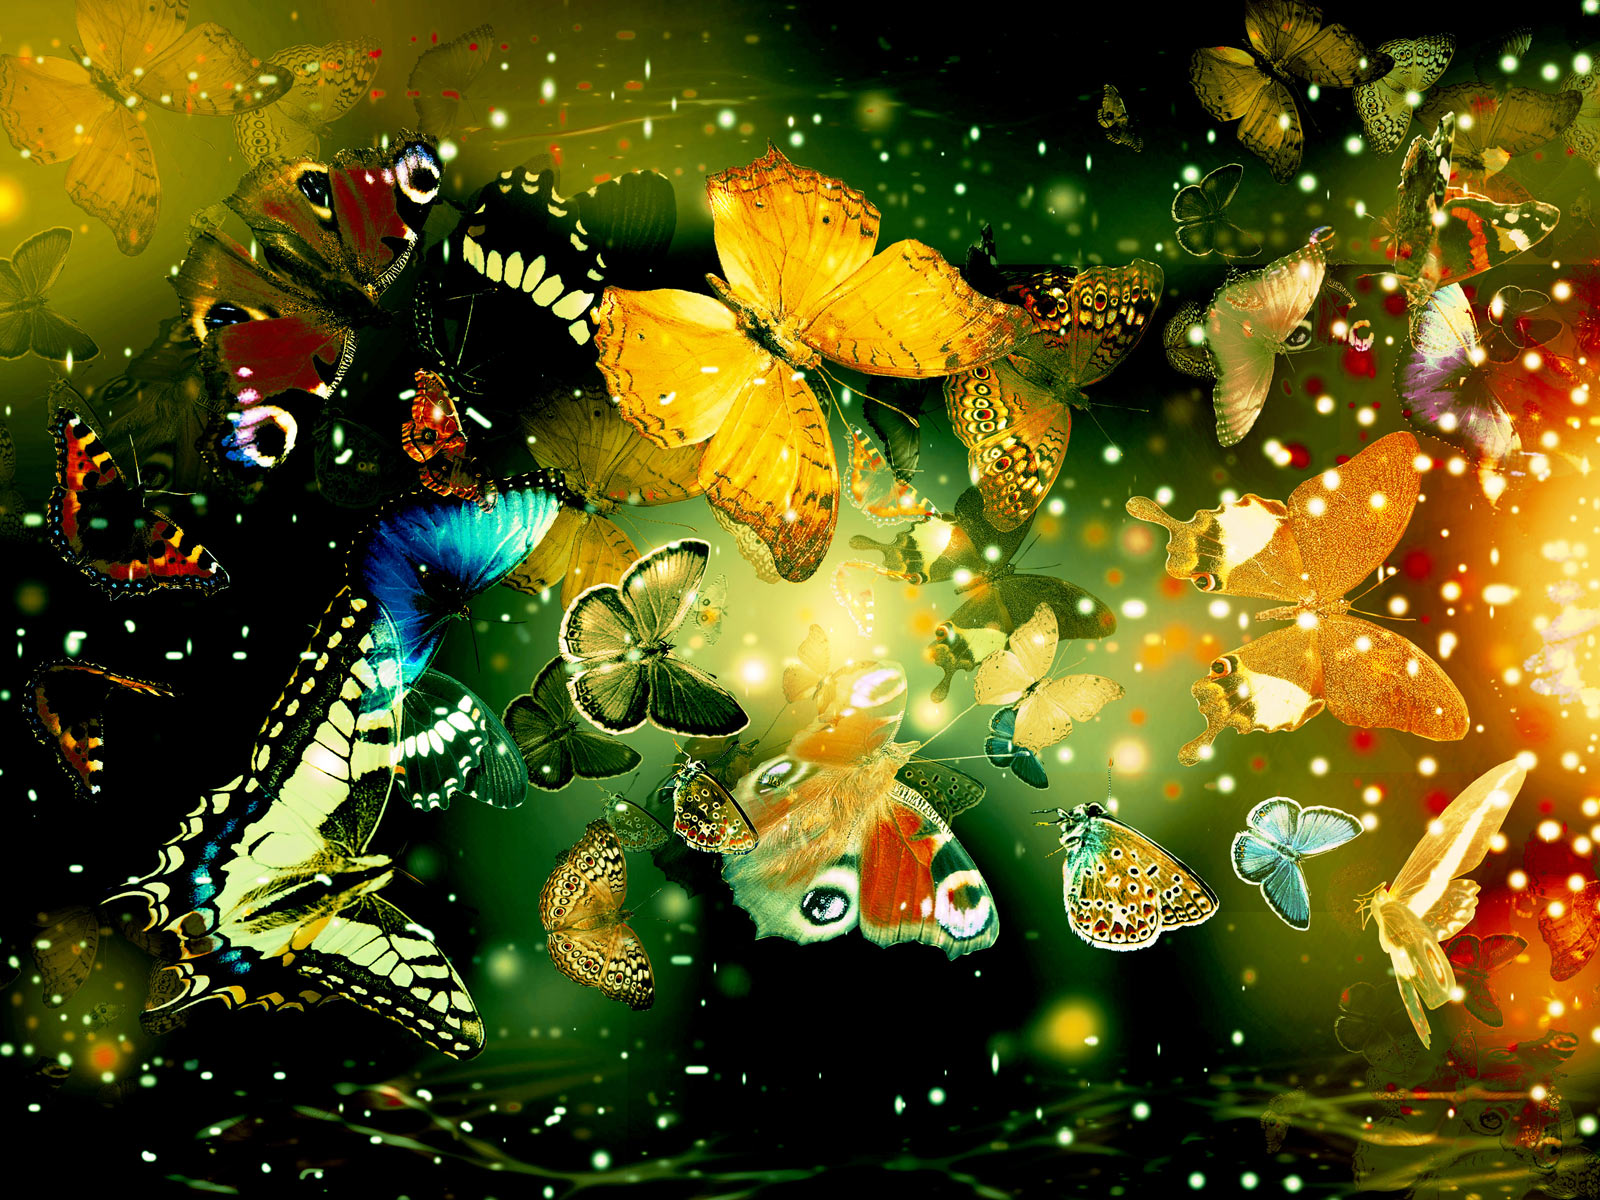 Magazines 24 Computer wallpaper backgrounds, free computer